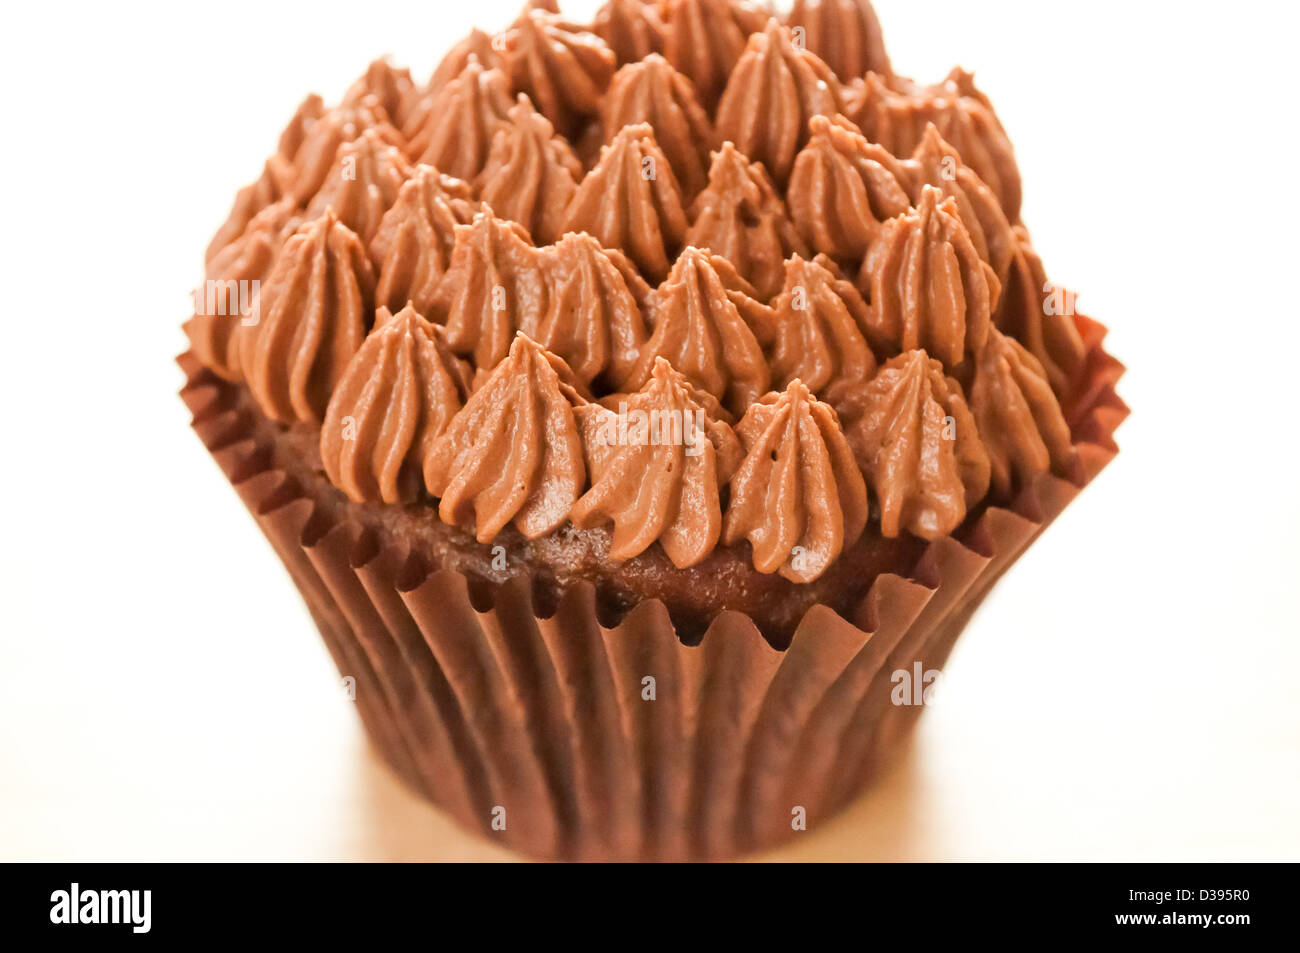 Chocolate cup cake lit from behind Stock Photo